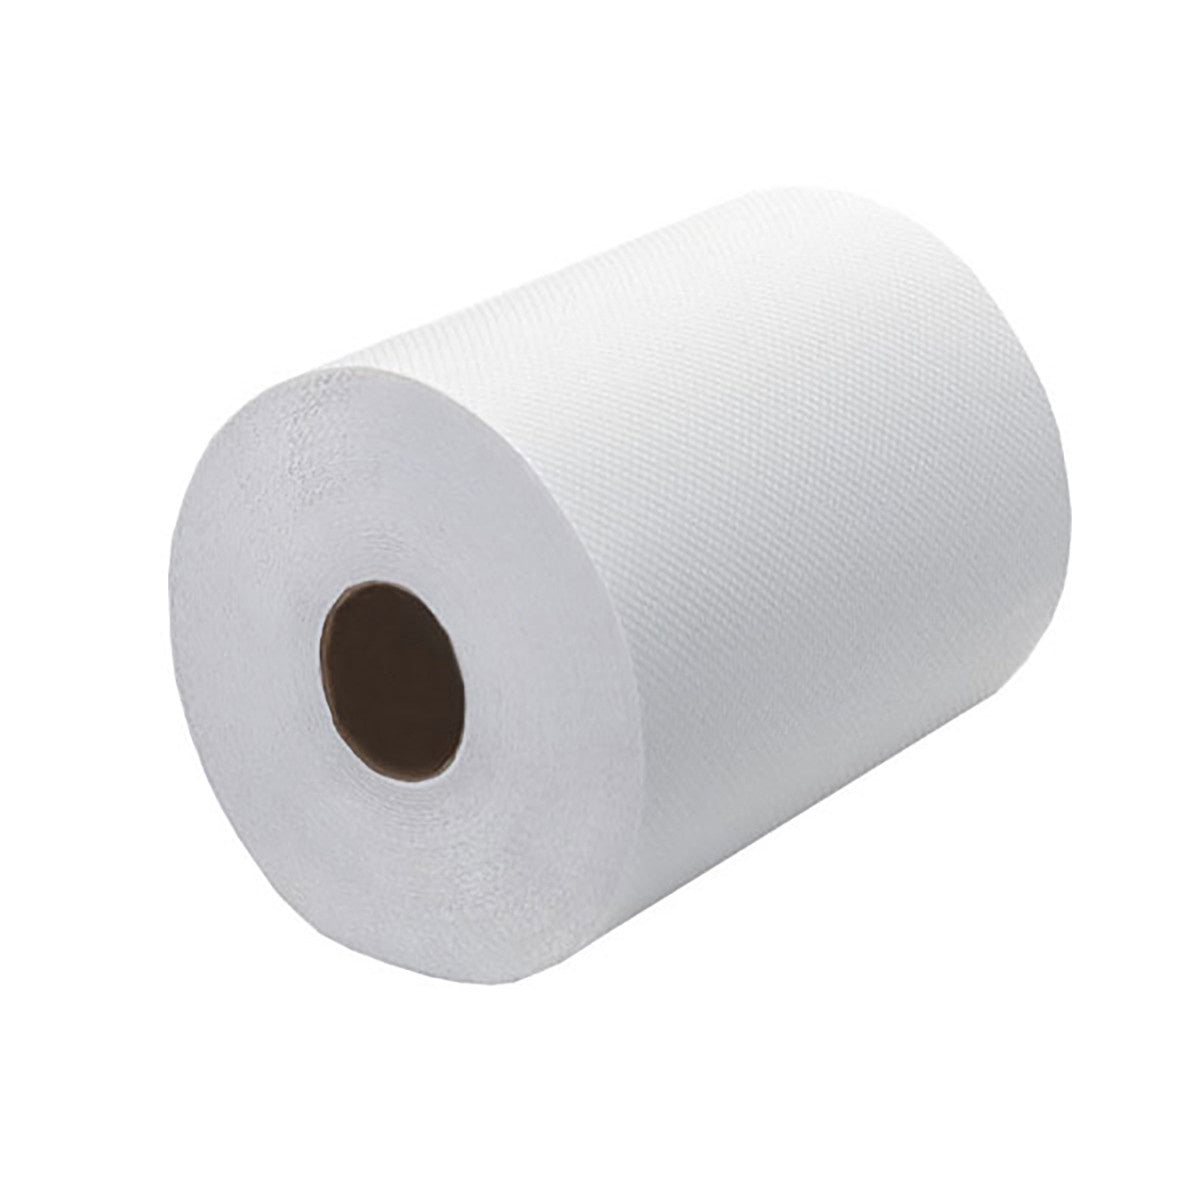 Clea Premium Recycled Controlled use Roll Towel, White, 8" 6x925'/roll 6 rolls/case